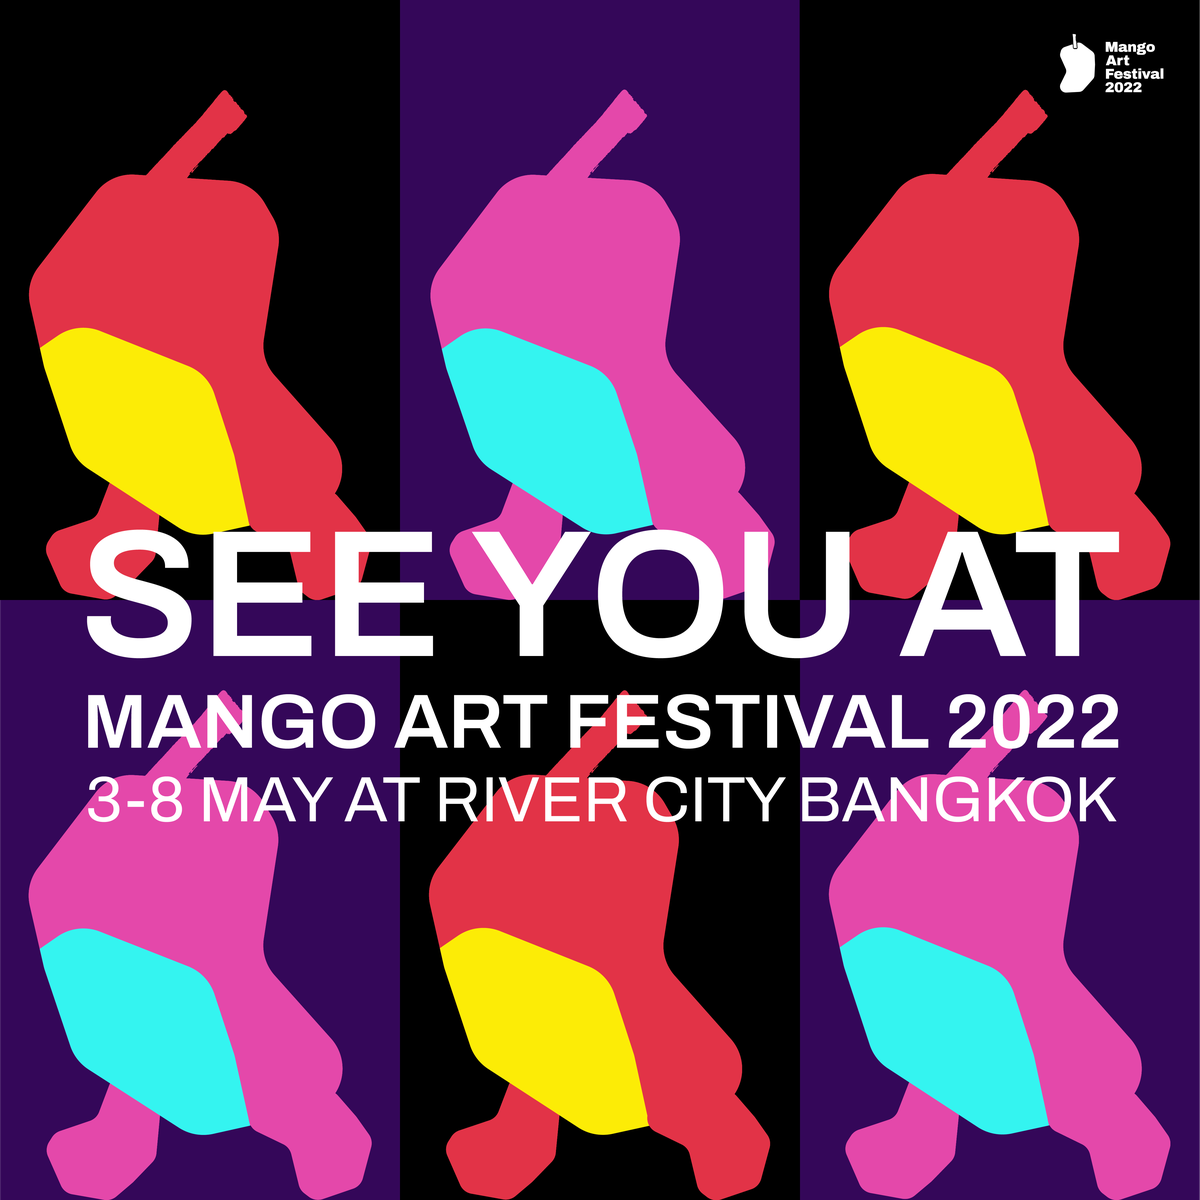 Mango Art Festival 2022 For those who fancy art in everyday life